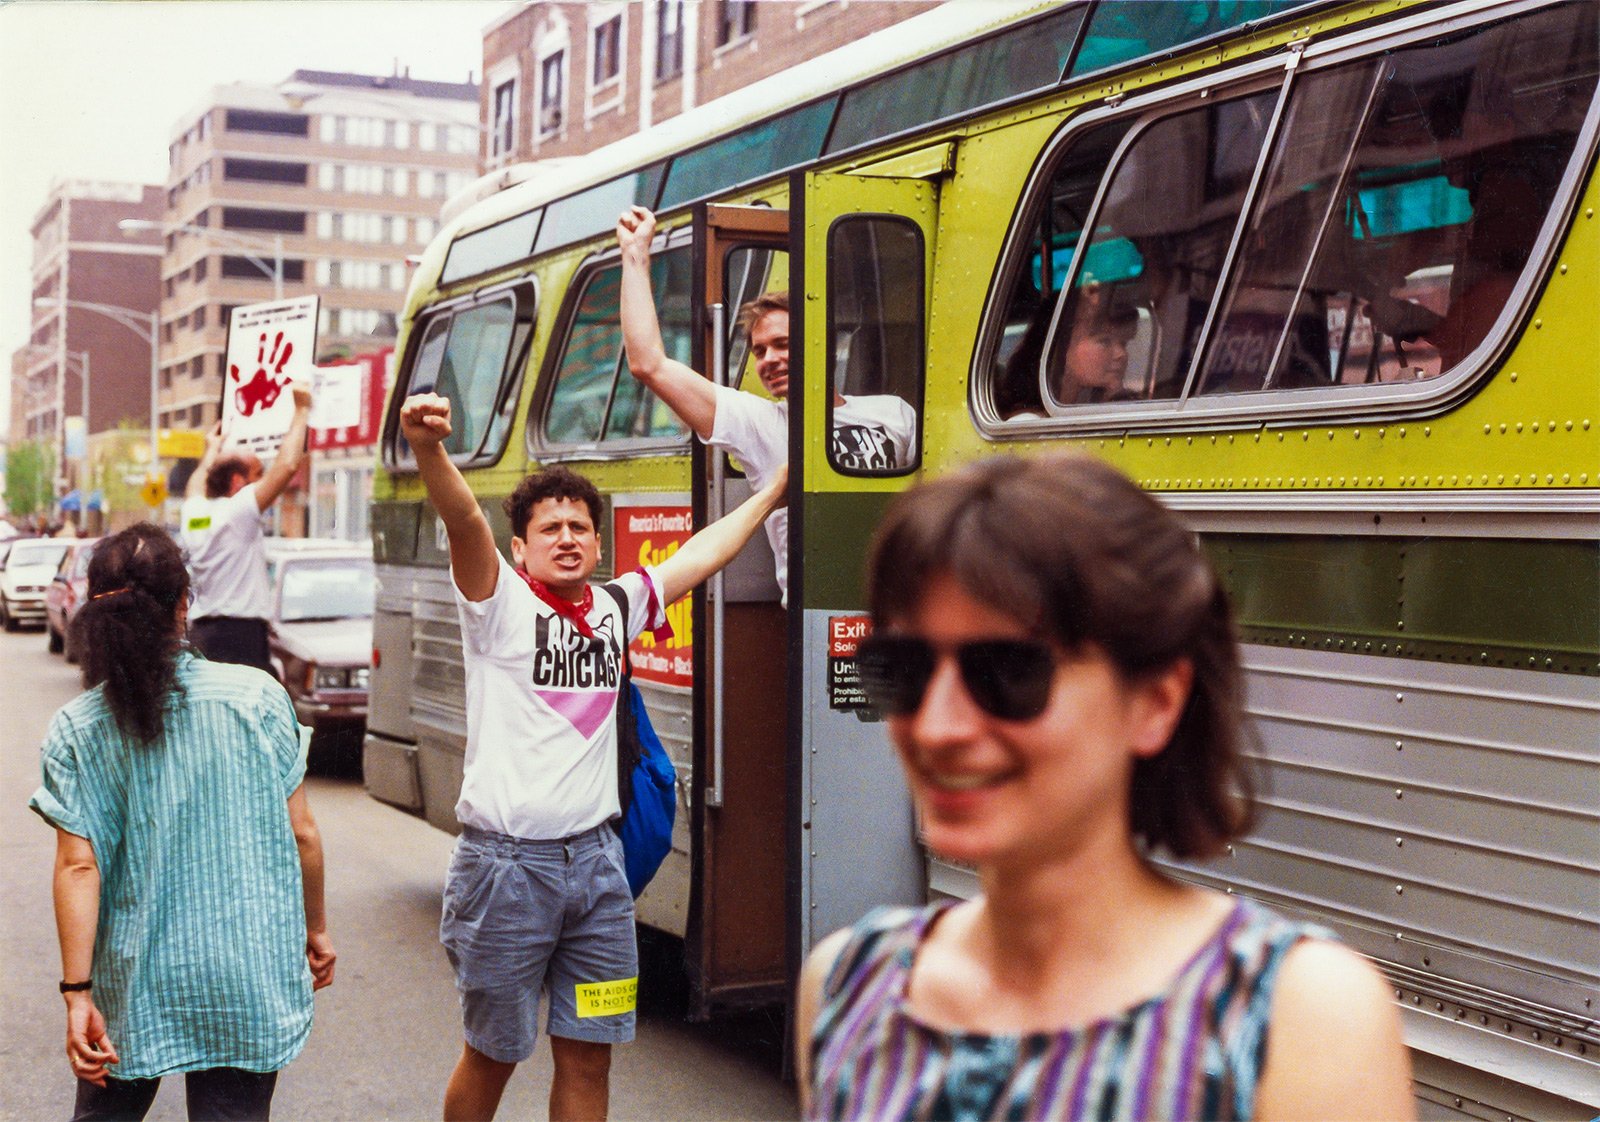 Danny Sotomayor standing next to a bus at the protest